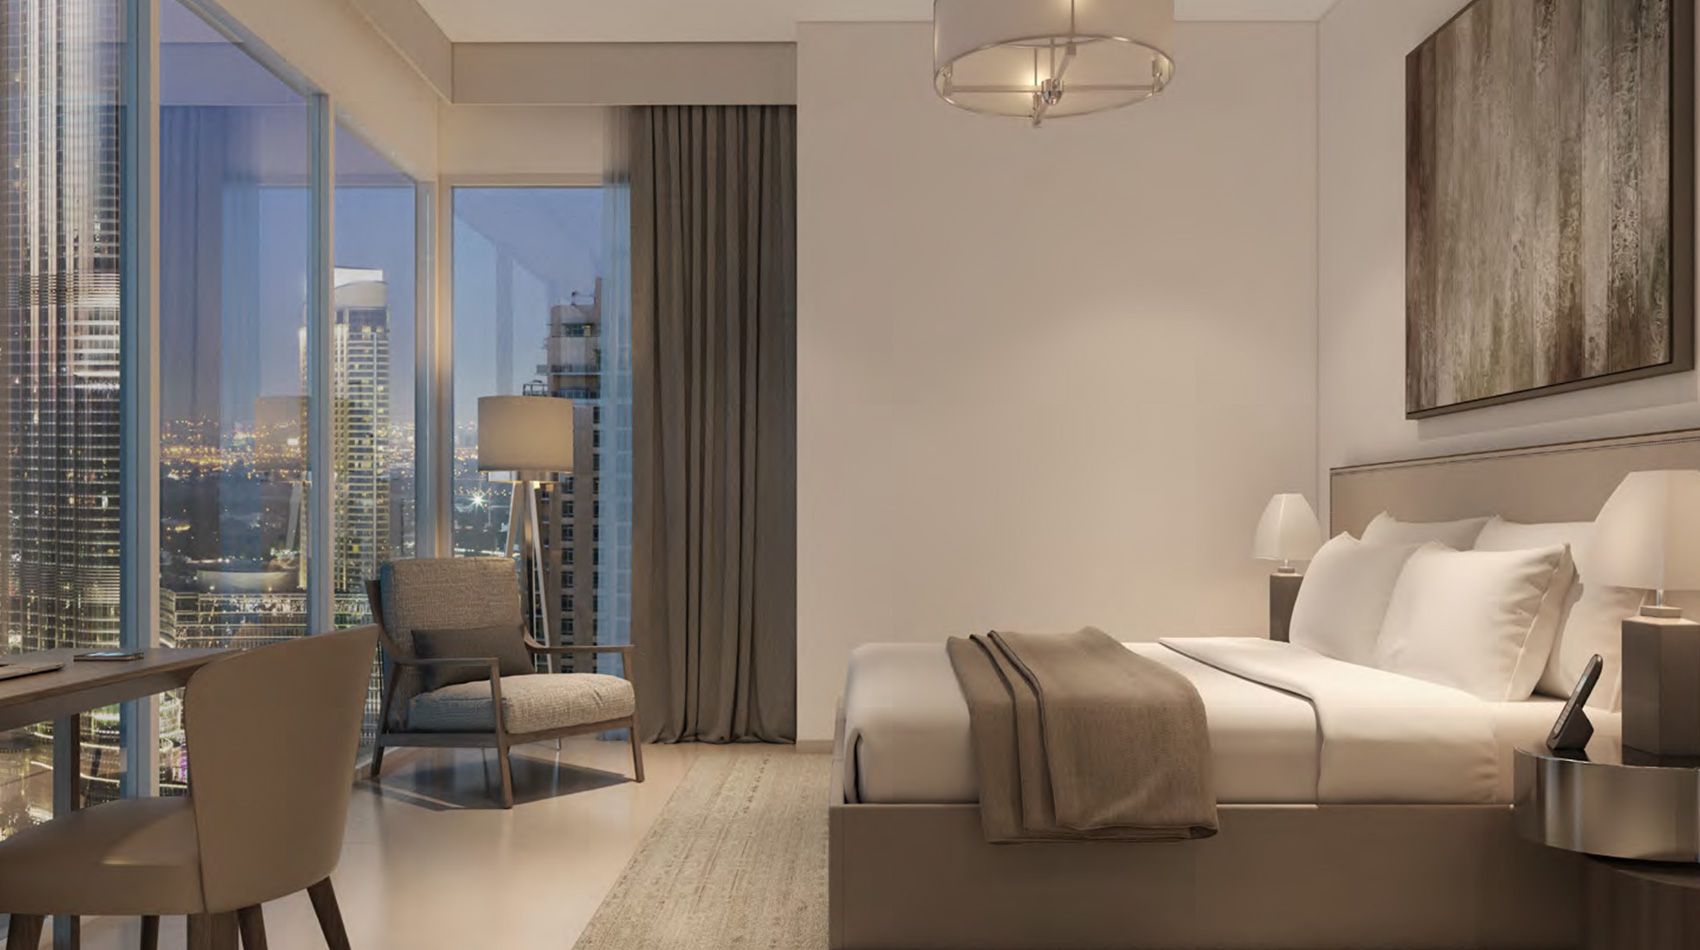 Act One, Act Two Apartments by Emaar amenities